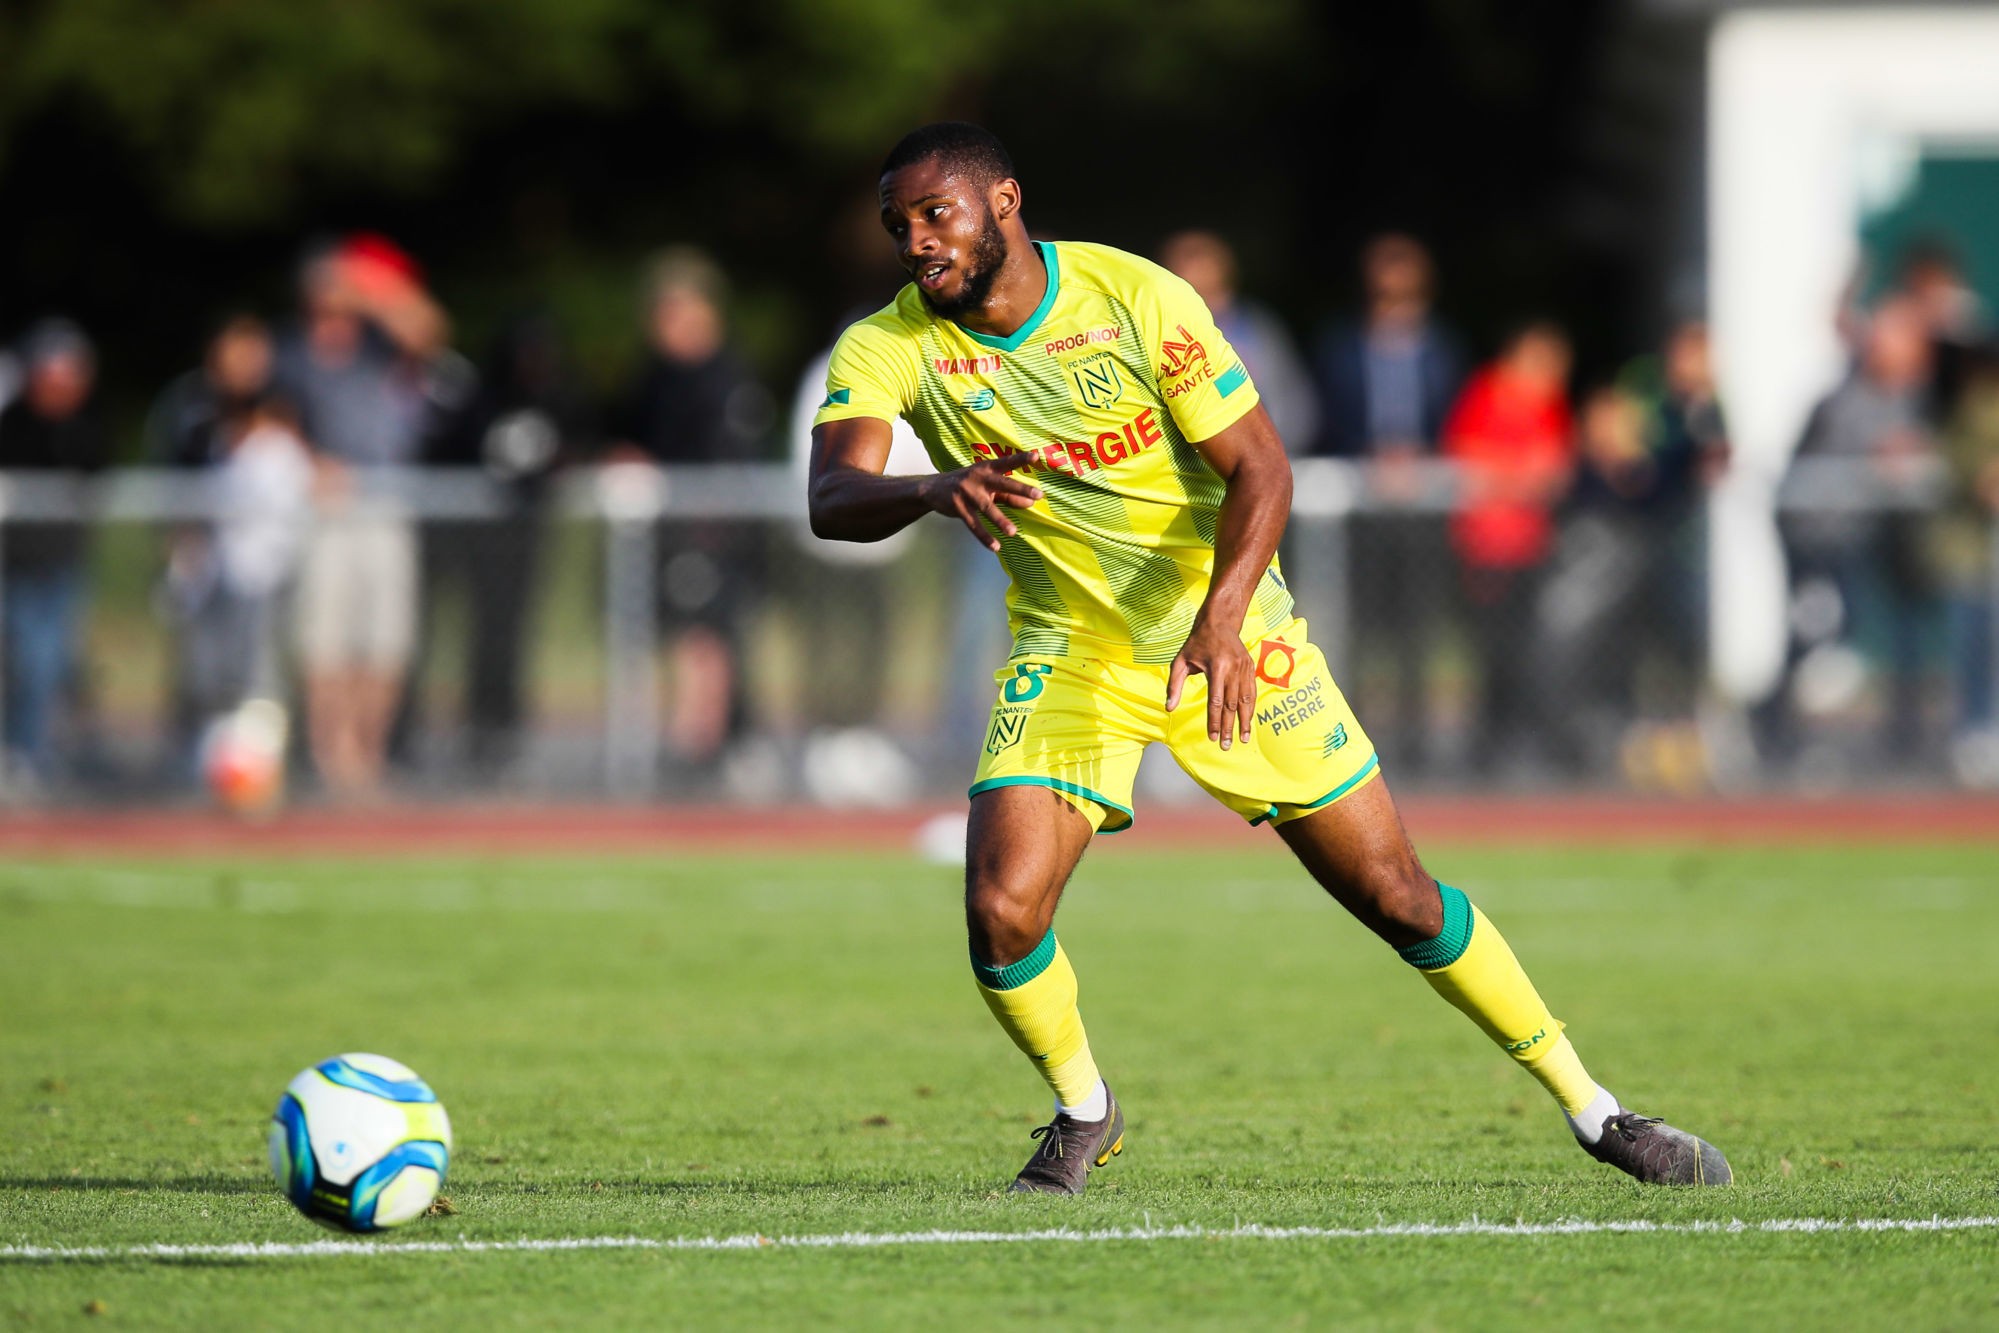 Marcus Coco of Nantes during the Friendly match between Nantes and Gijon on July 30, 2019 in Nantes, France. (Photo by Vincent Michel/Icon Sport)